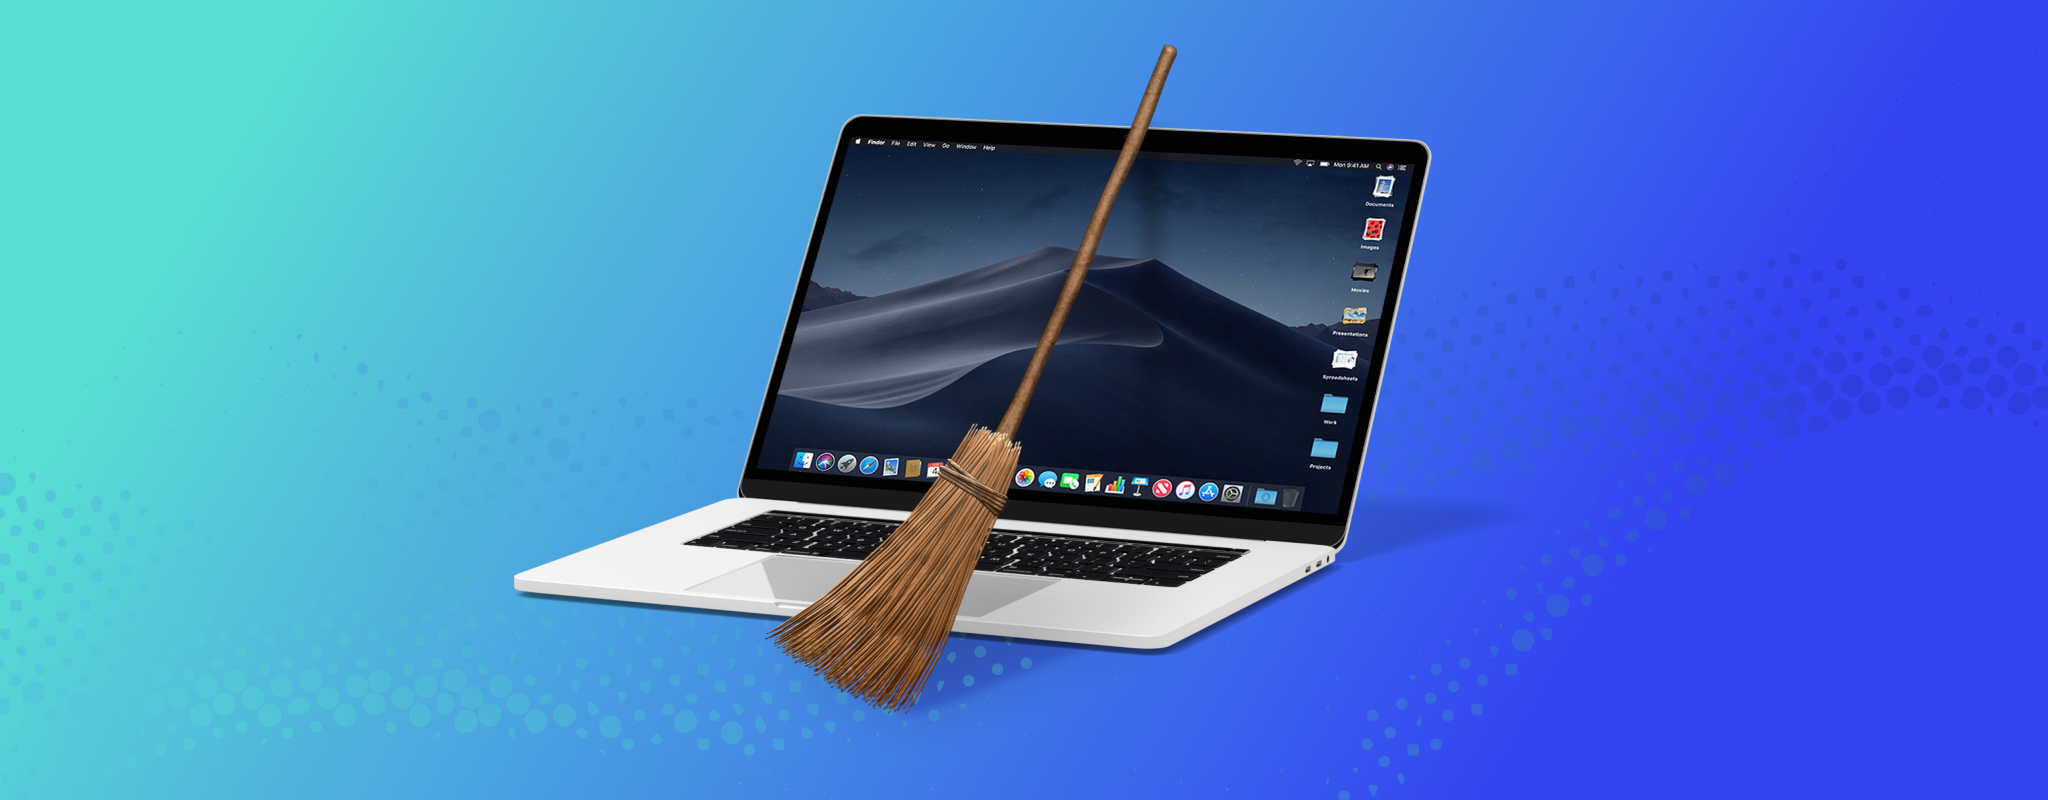 which is best photo editor for mac that removes unwanted items in photo